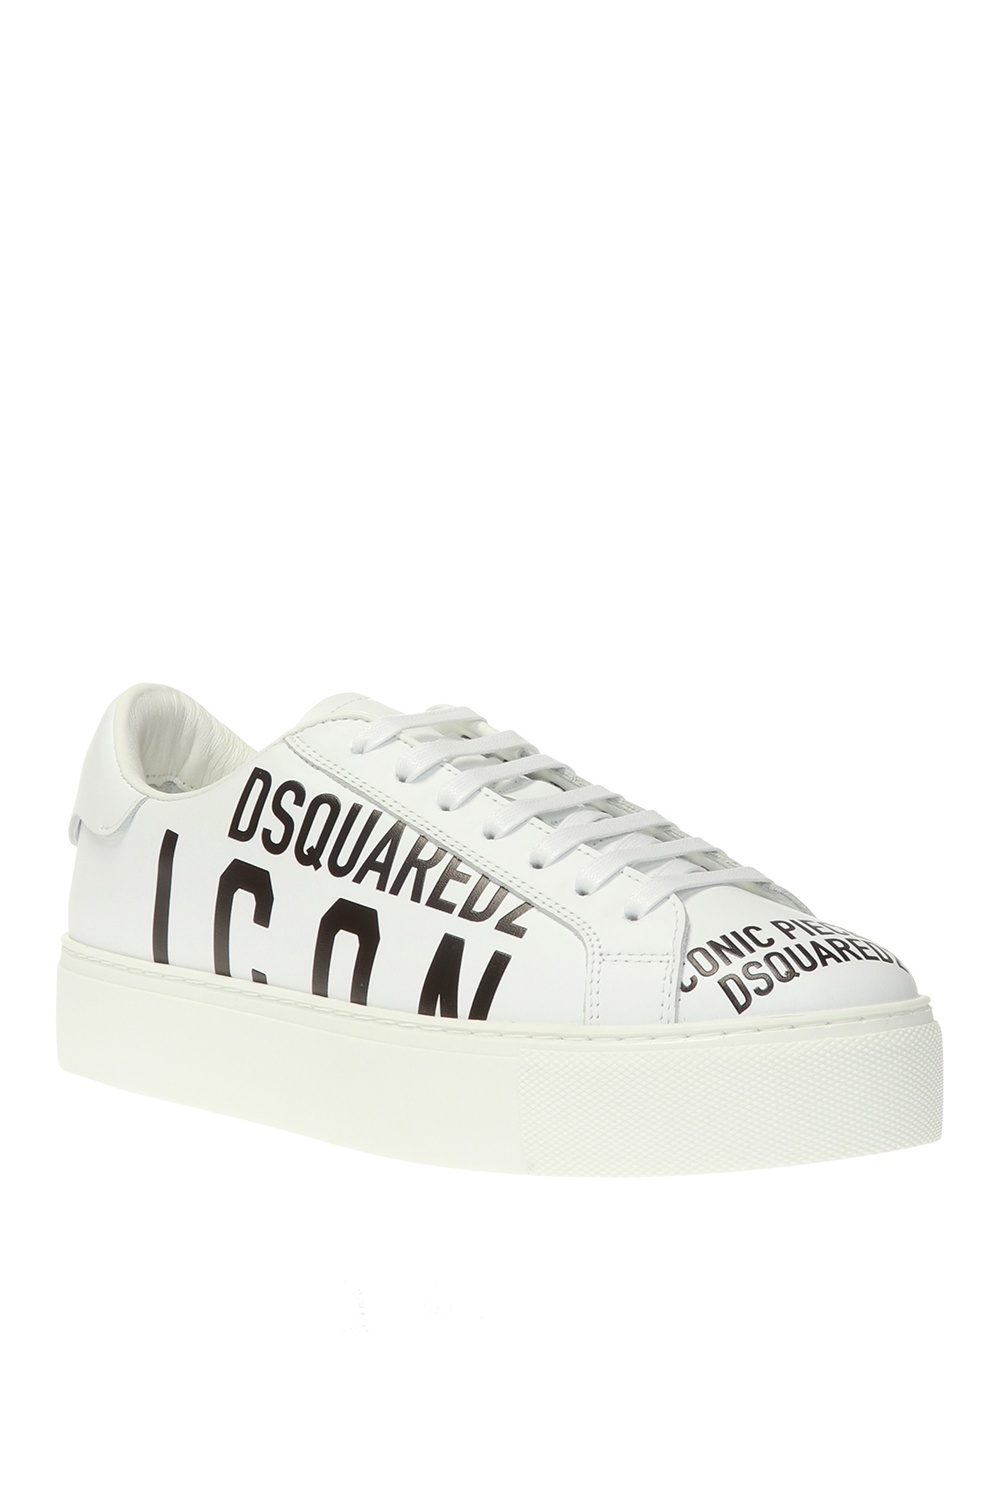 Dsquared2 Logo sneakers